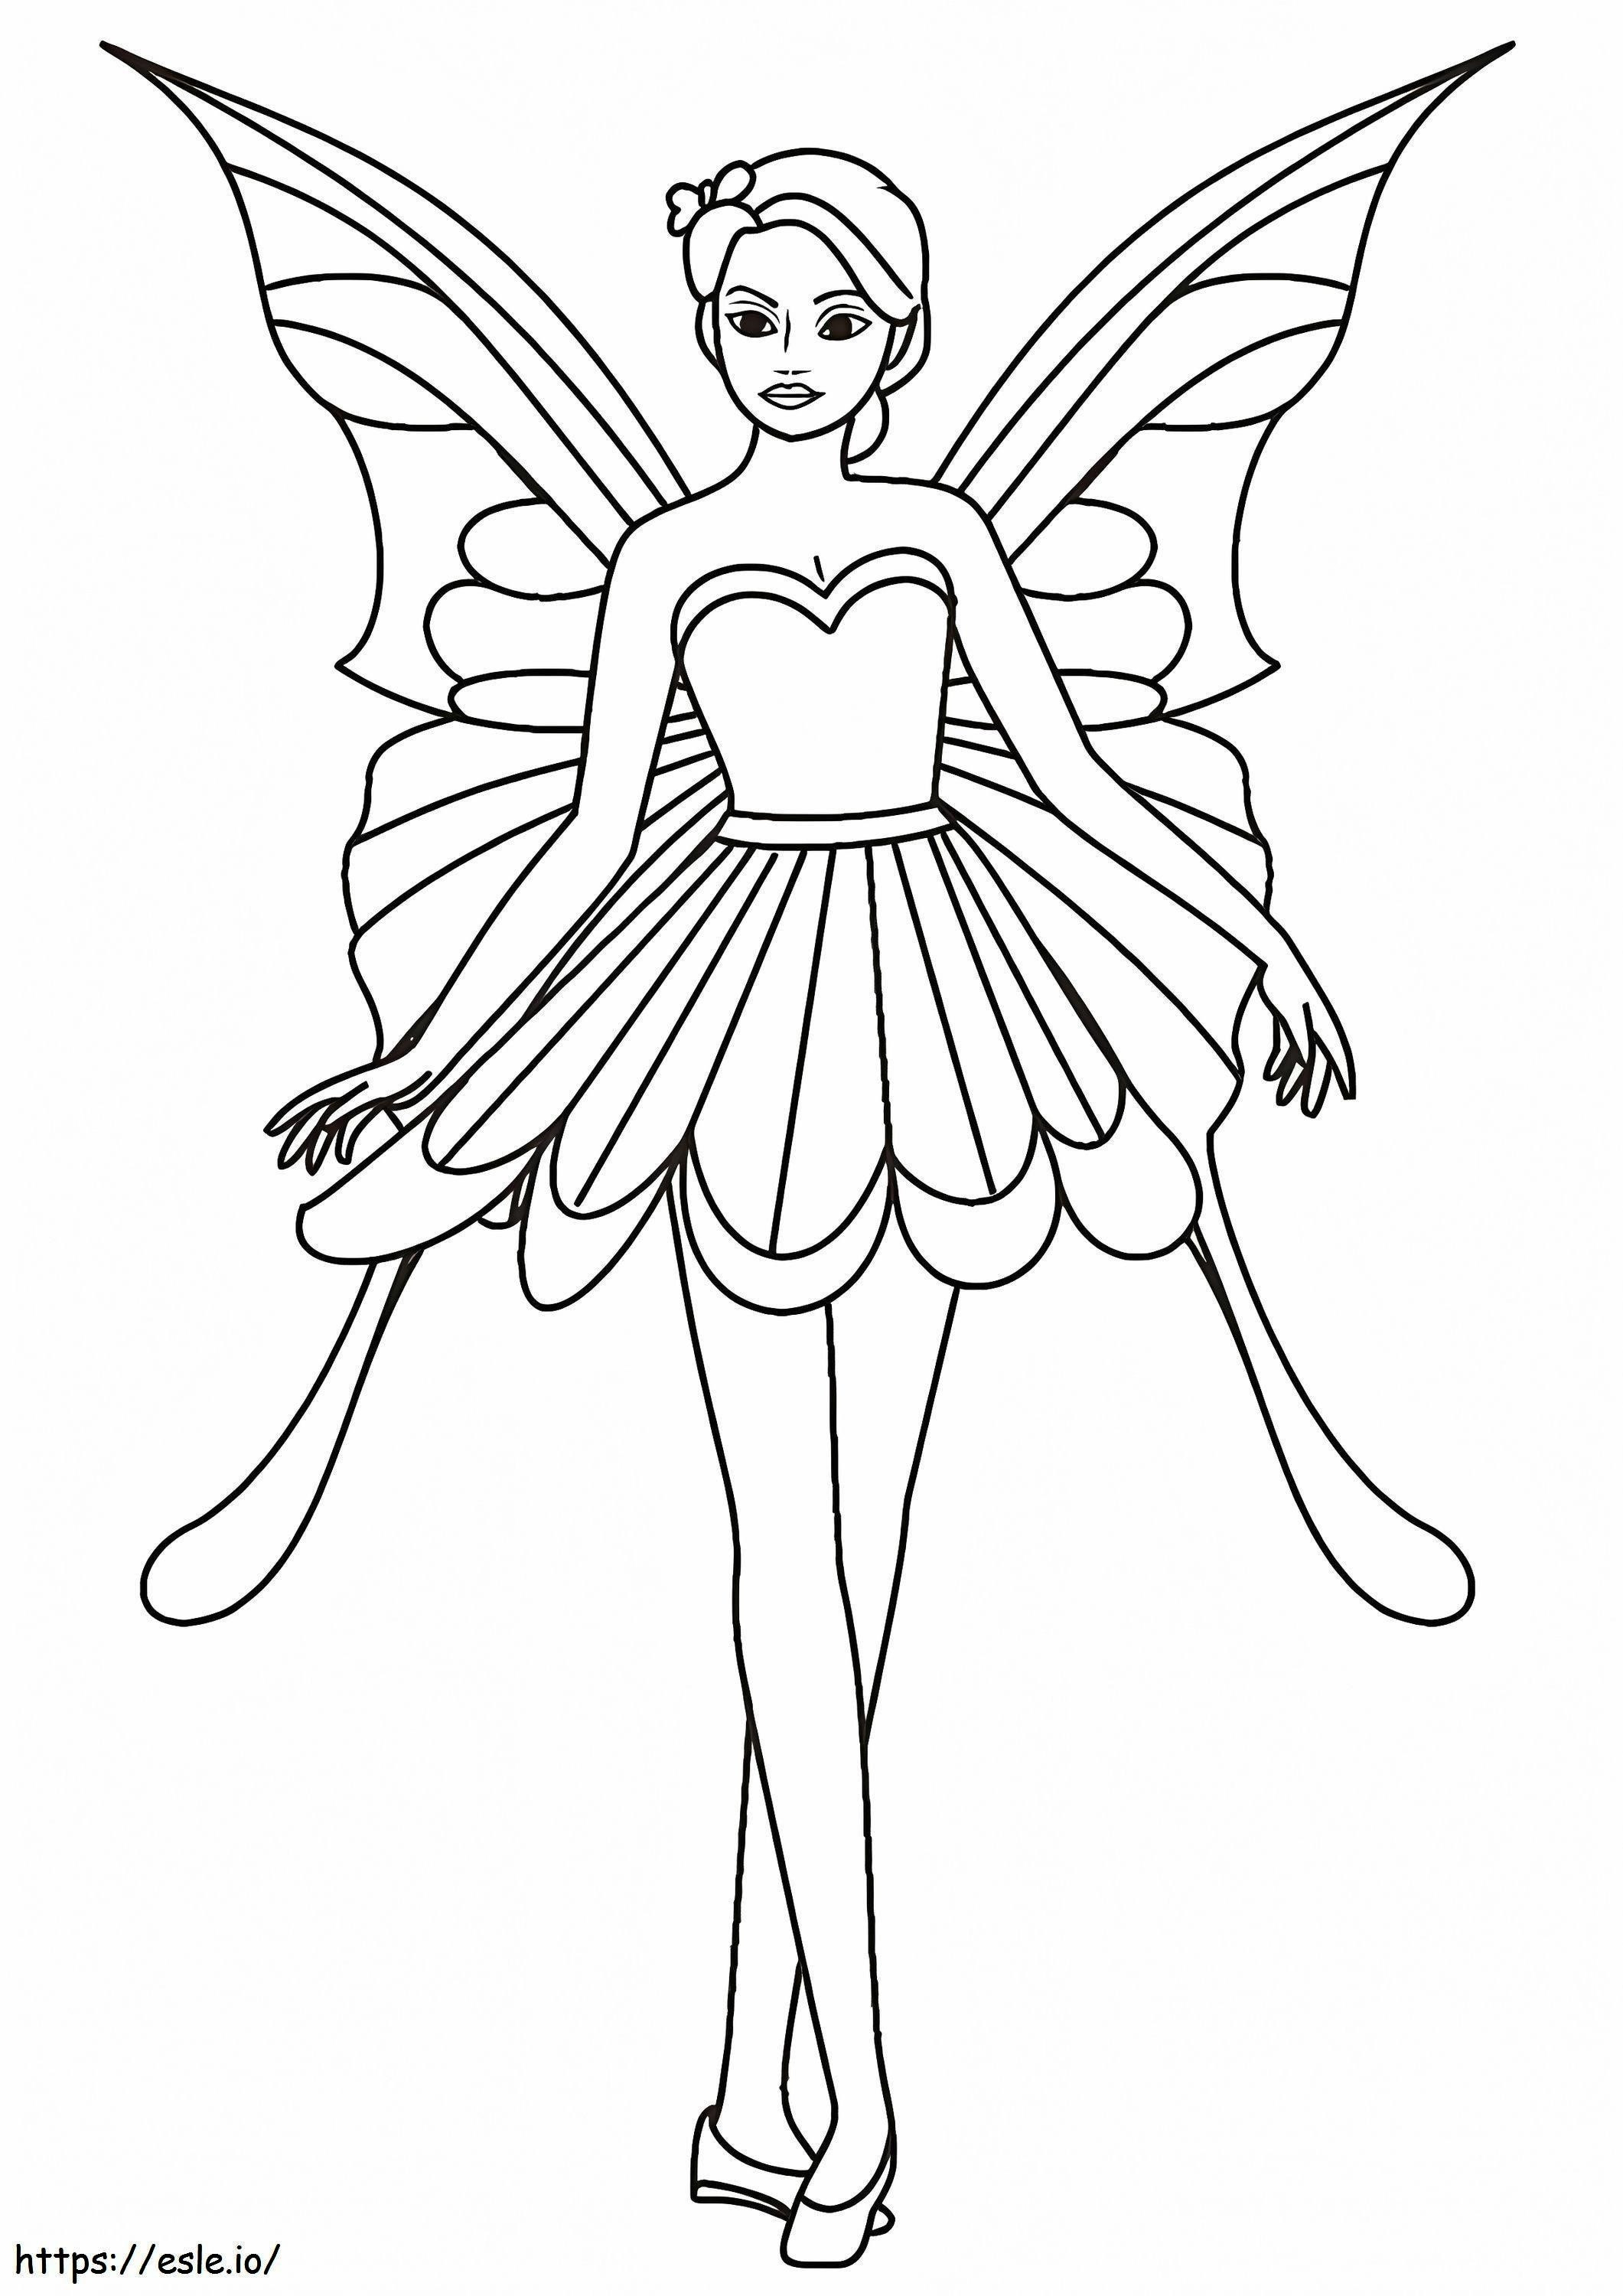 Amazing Fairy coloring page